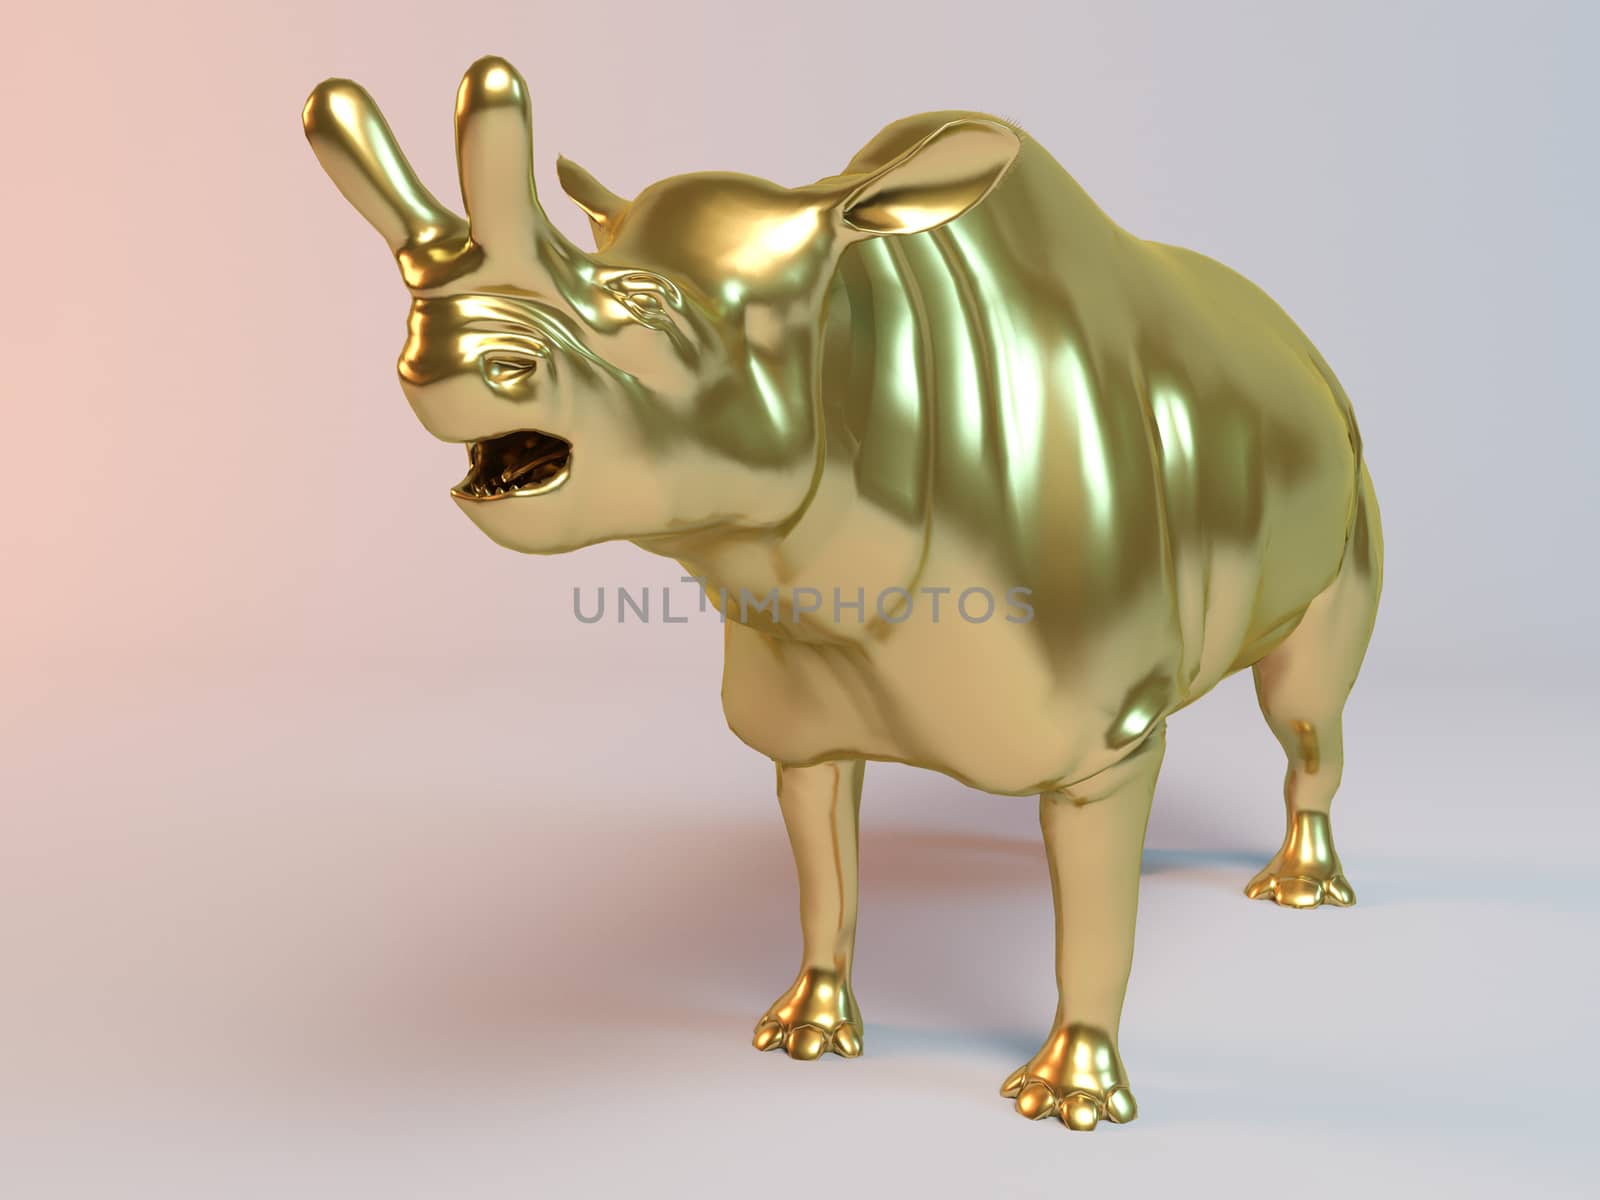 Golden 3D animal dino, dinosaur inside a stage with high render quality to be used as a logo, medal, symbol, shape, emblem, icon, business, geometric, label or any other use